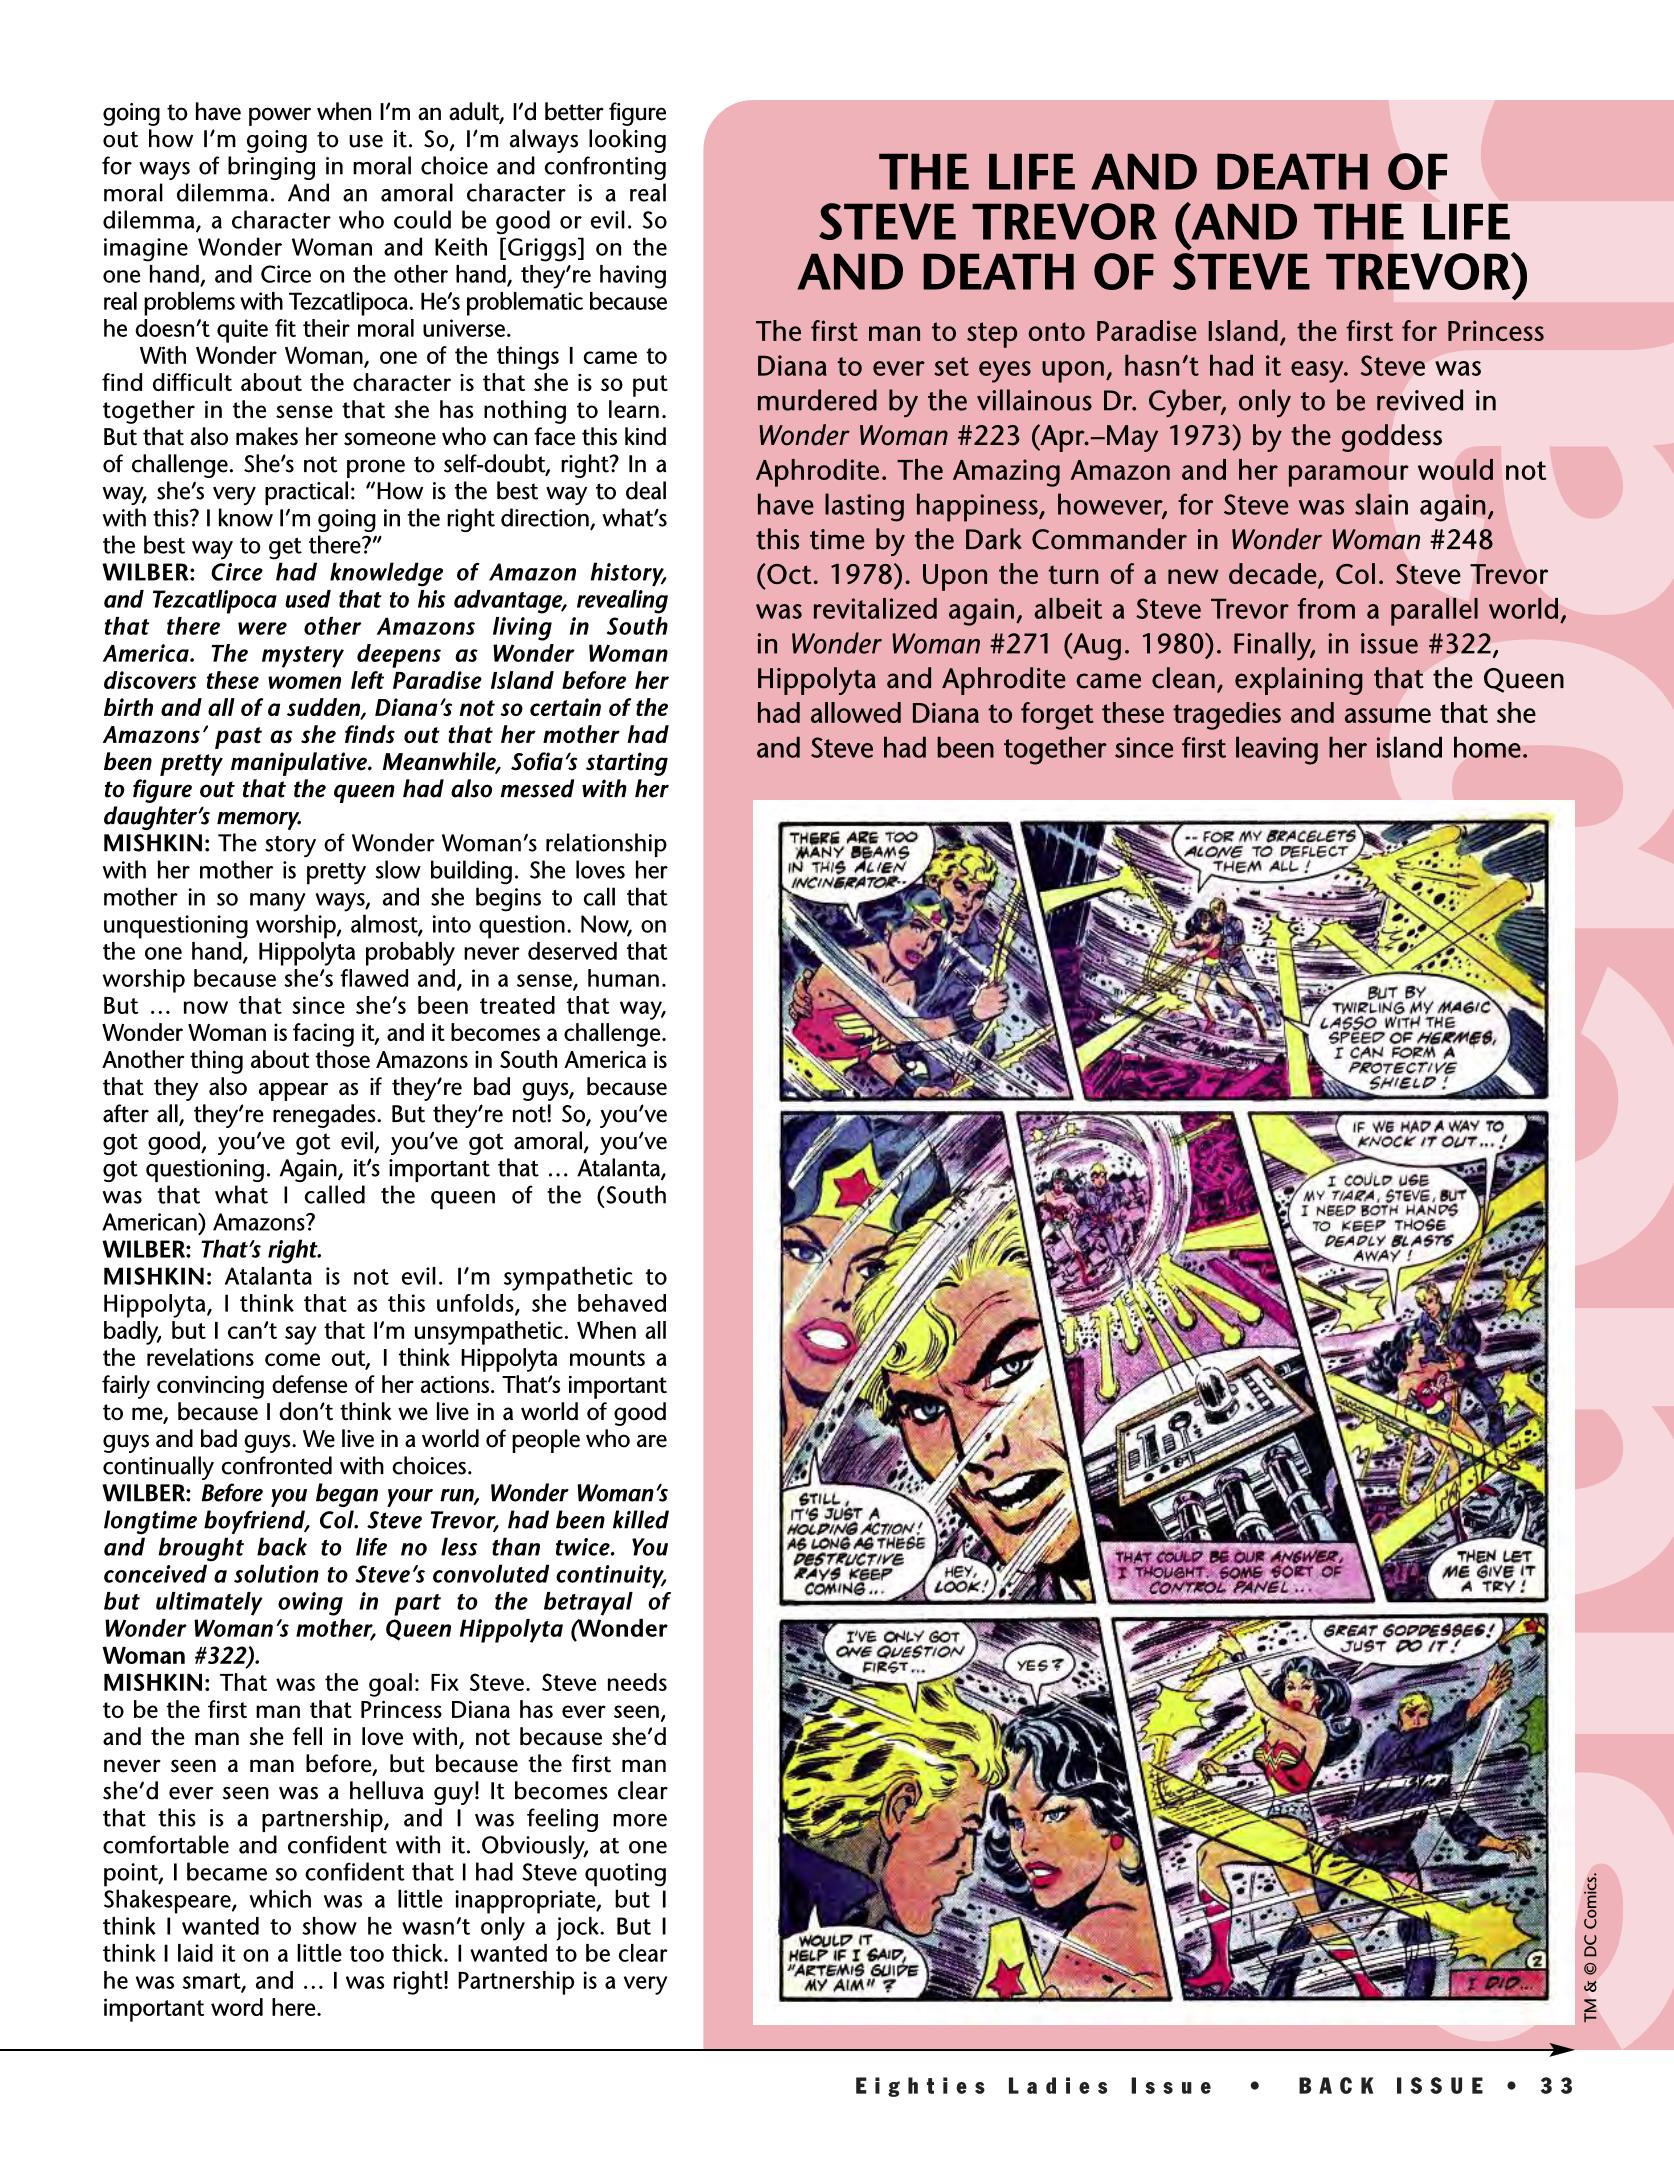 Read online Back Issue comic -  Issue #90 - 29